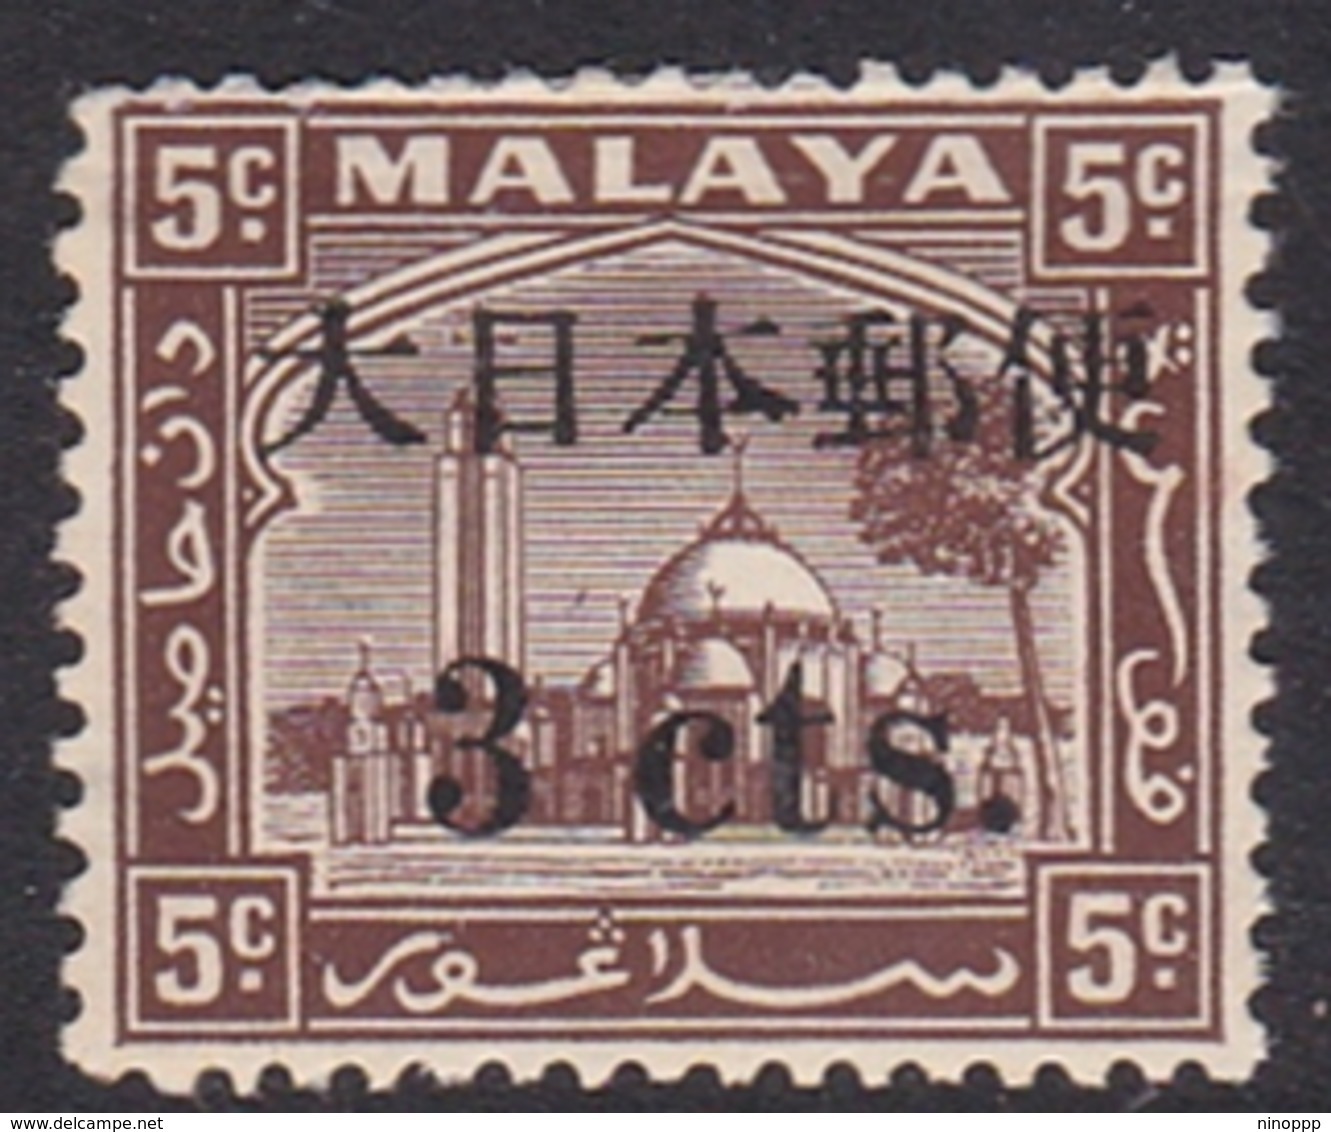 Malaya-Selangor Japan Occupation N 31 1943 3c On 5c Chocolate, Mint Never Hinged - Occupazione Giapponese